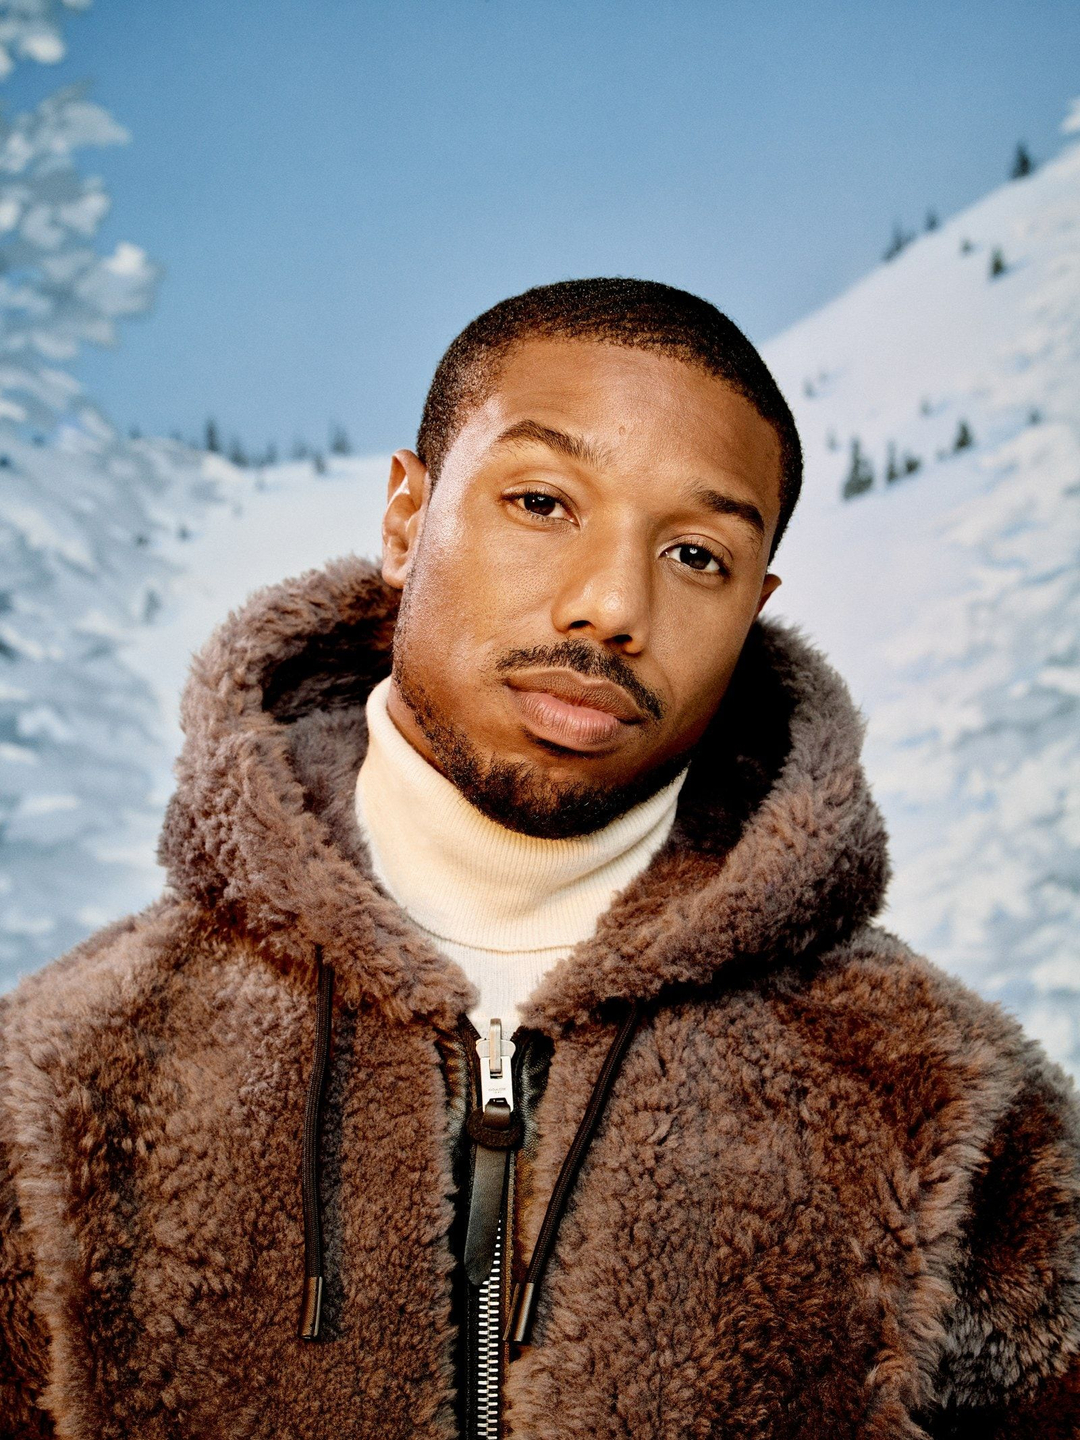 Michael B. Jordan who is his father